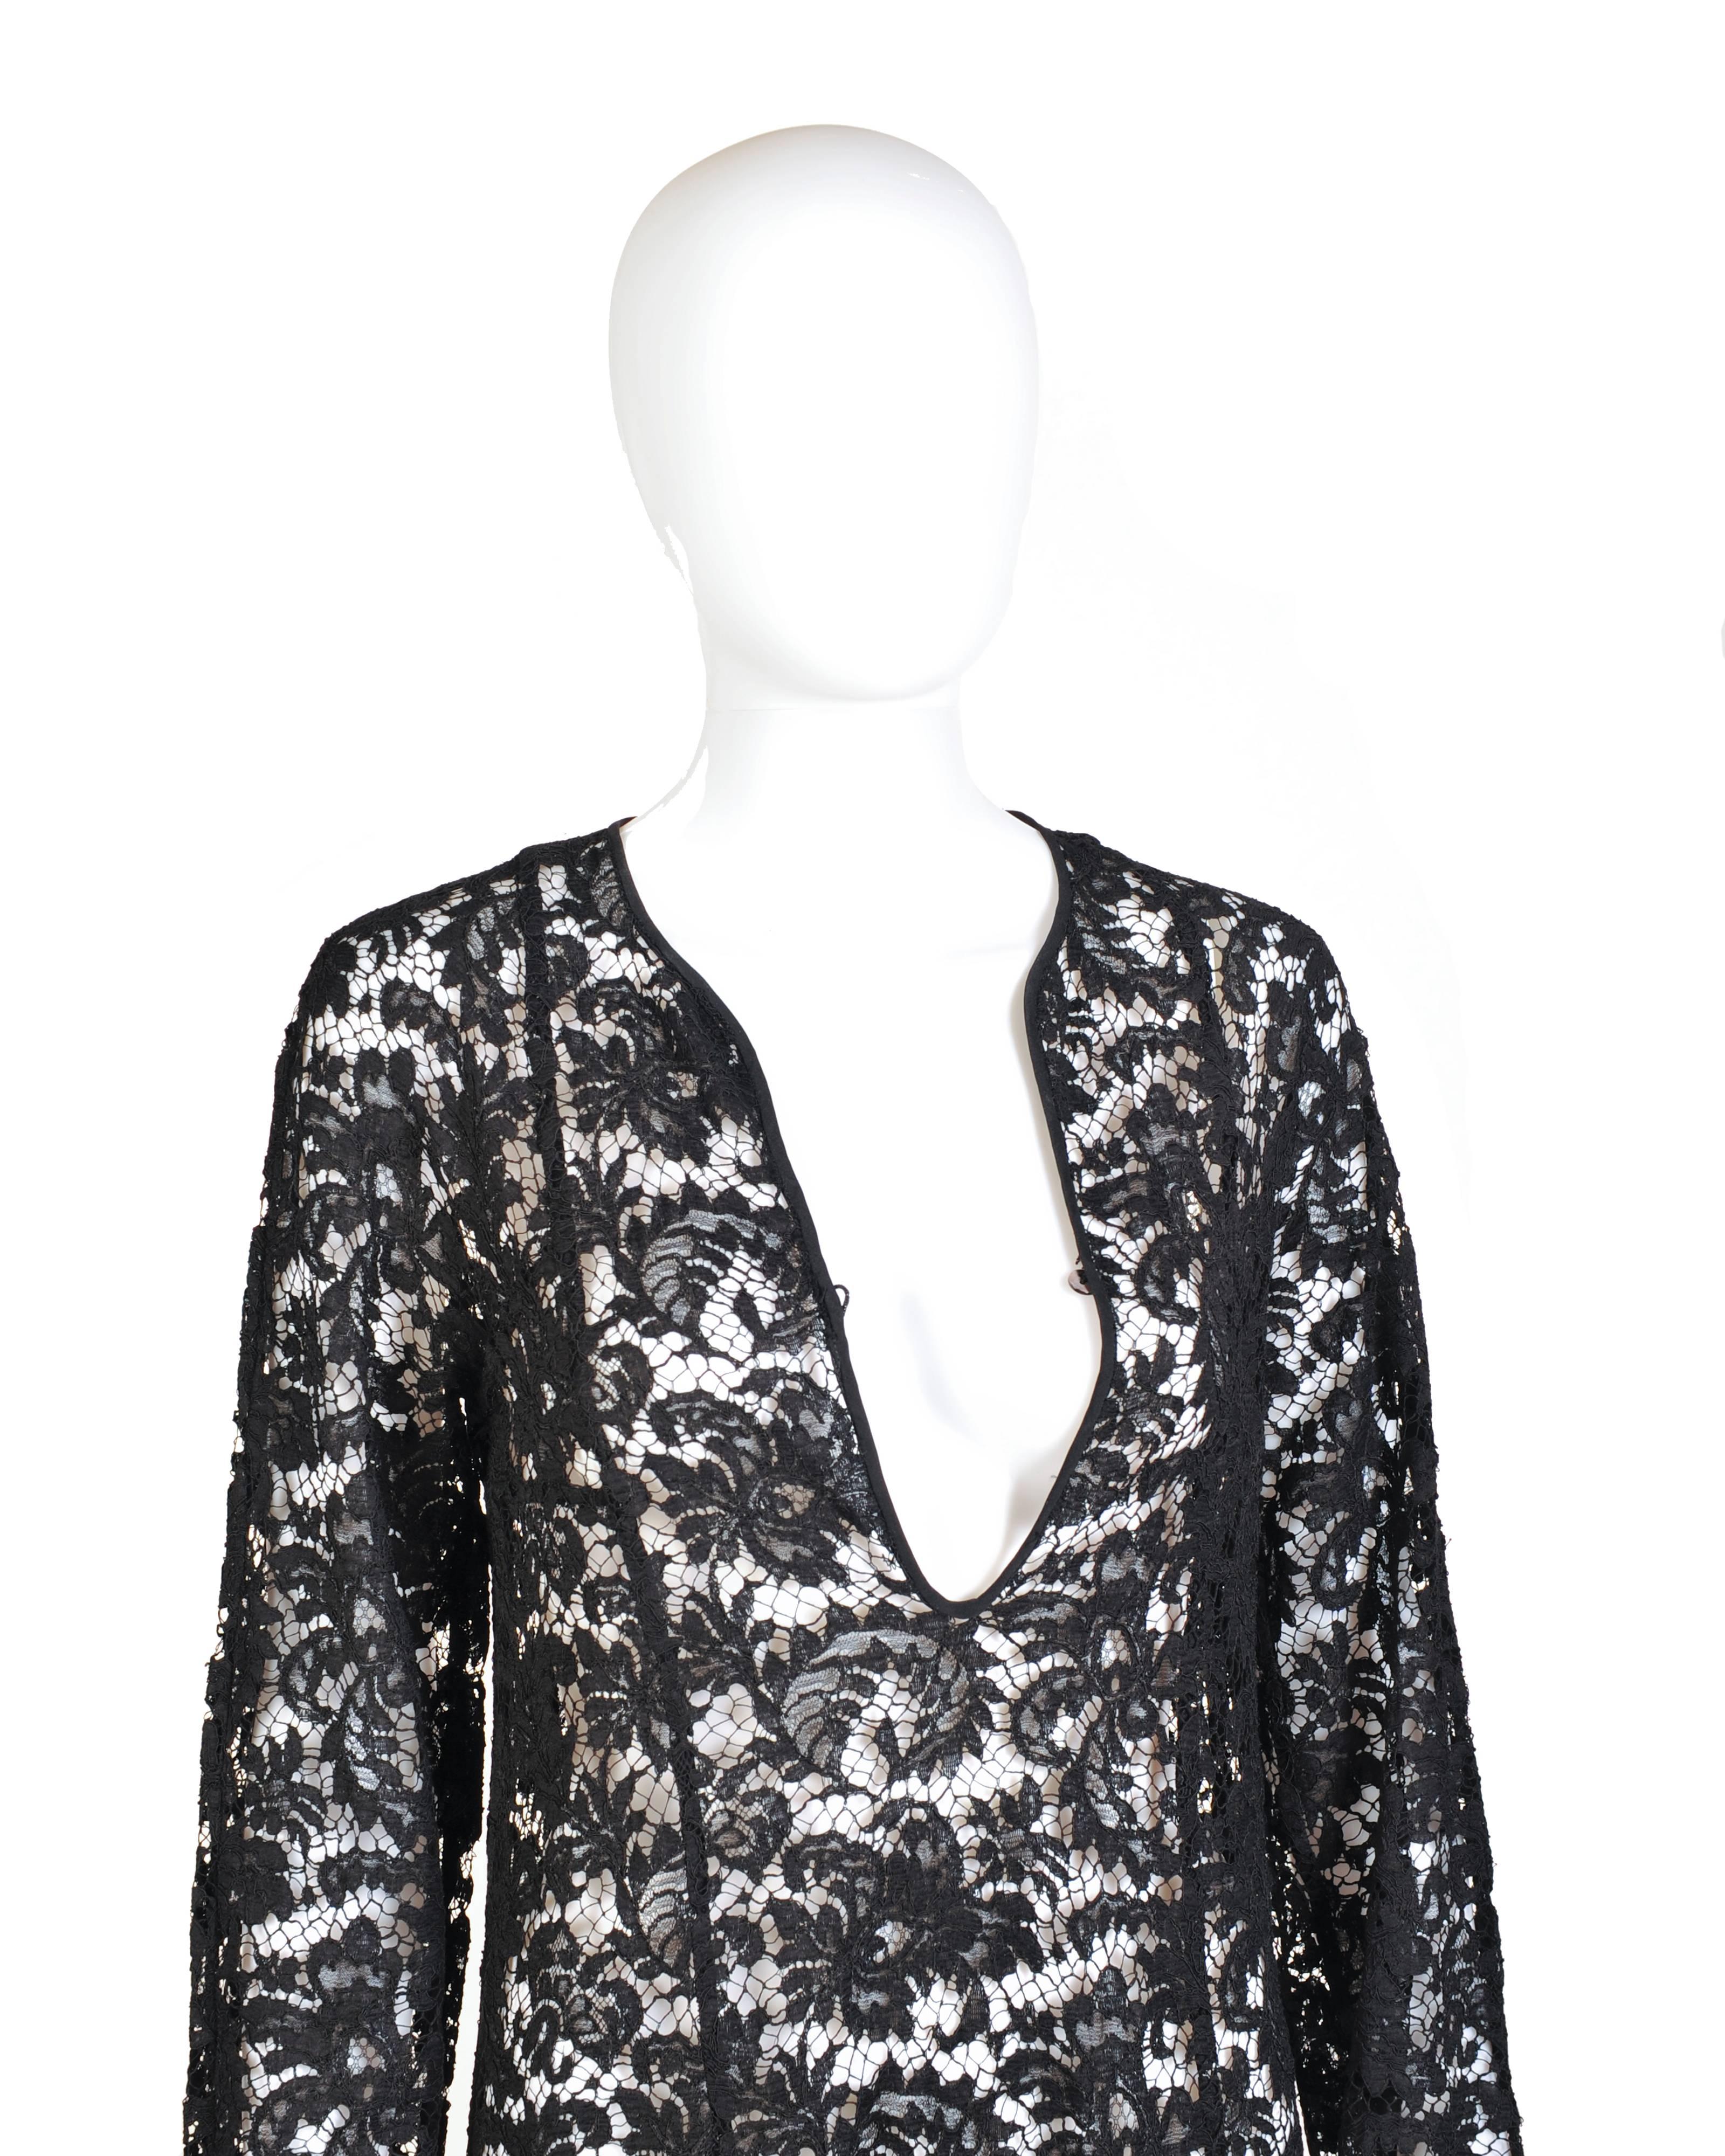 1995 Vintage Iconic Tom Ford for Gucci Black Lace Dress 2